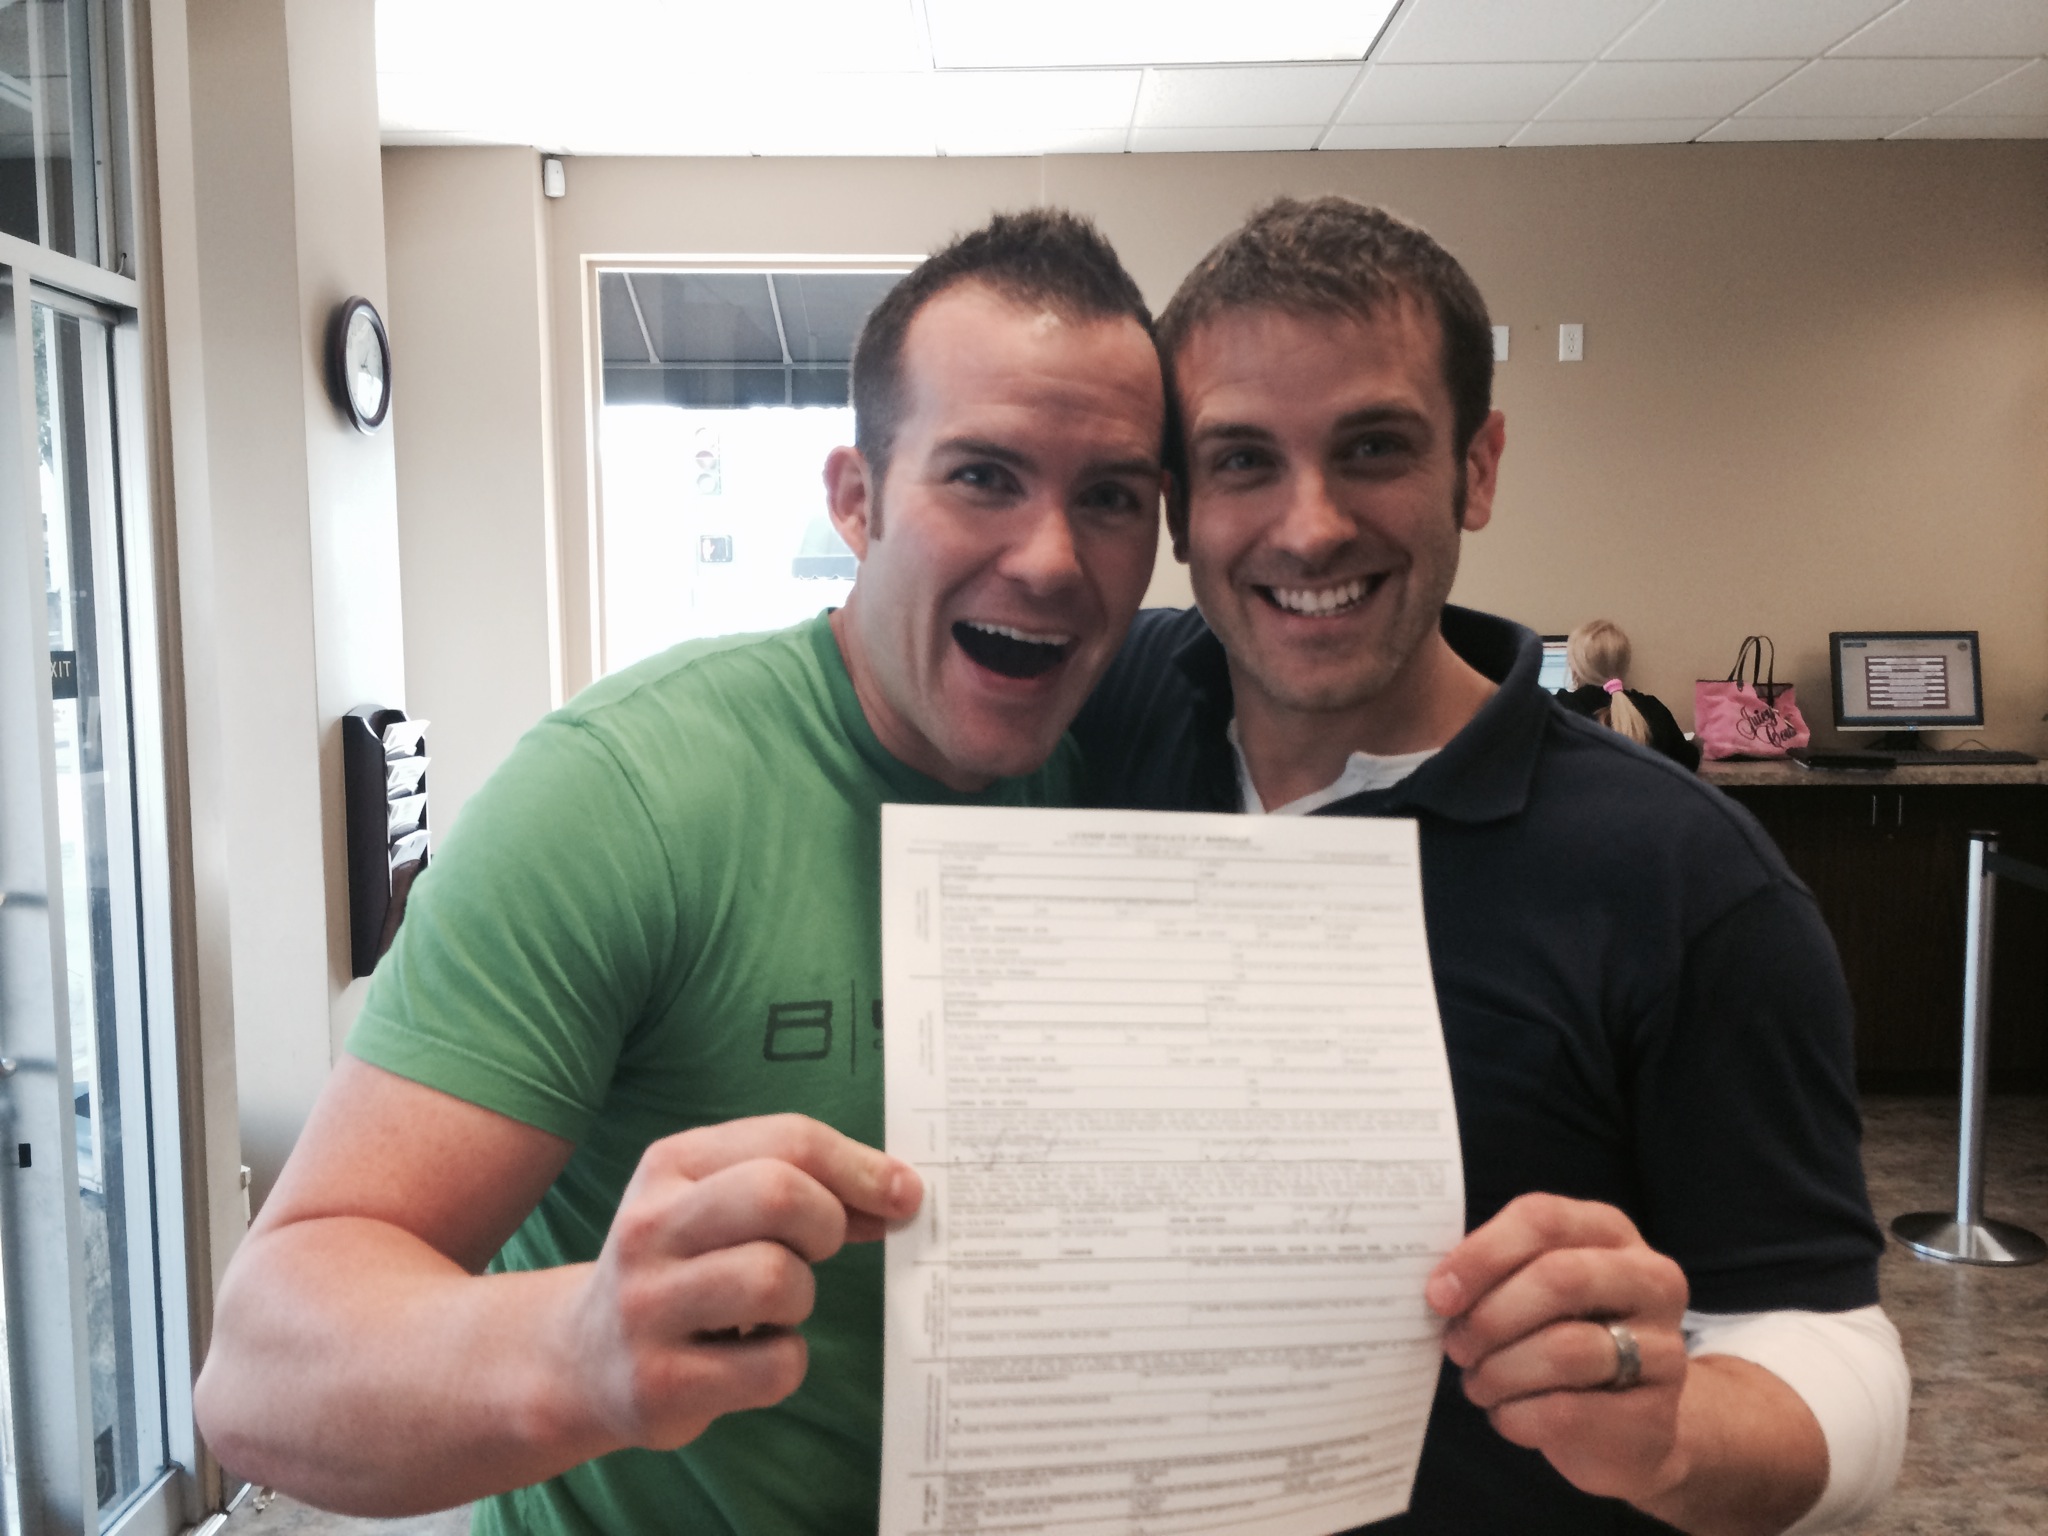 Spencer Stout and Dustin Reeser pose with their marriage certificate.